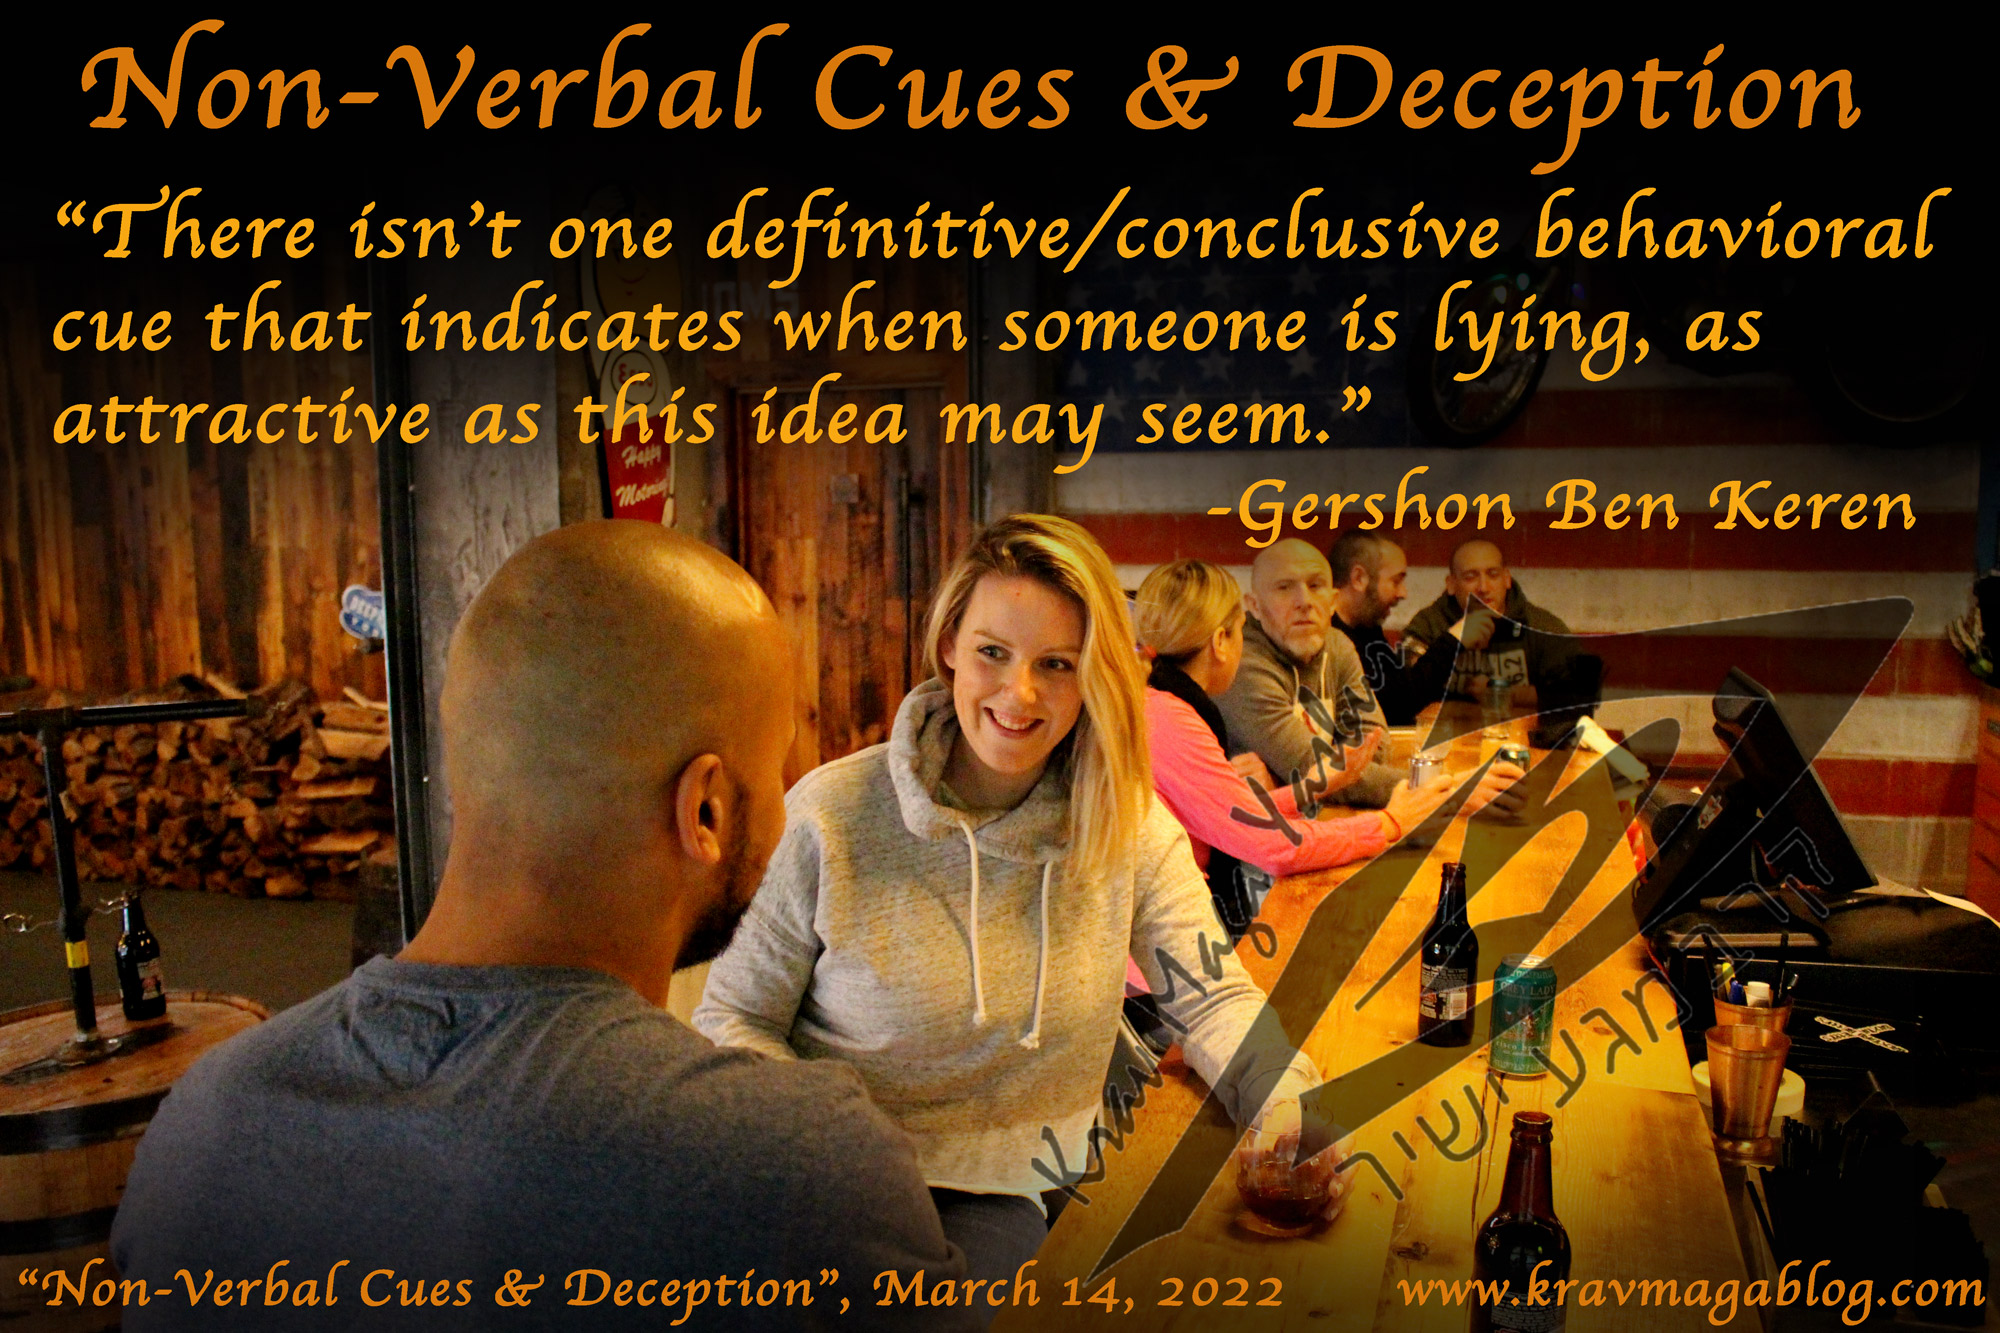 Blog About Non-Verbal Cues & Deception